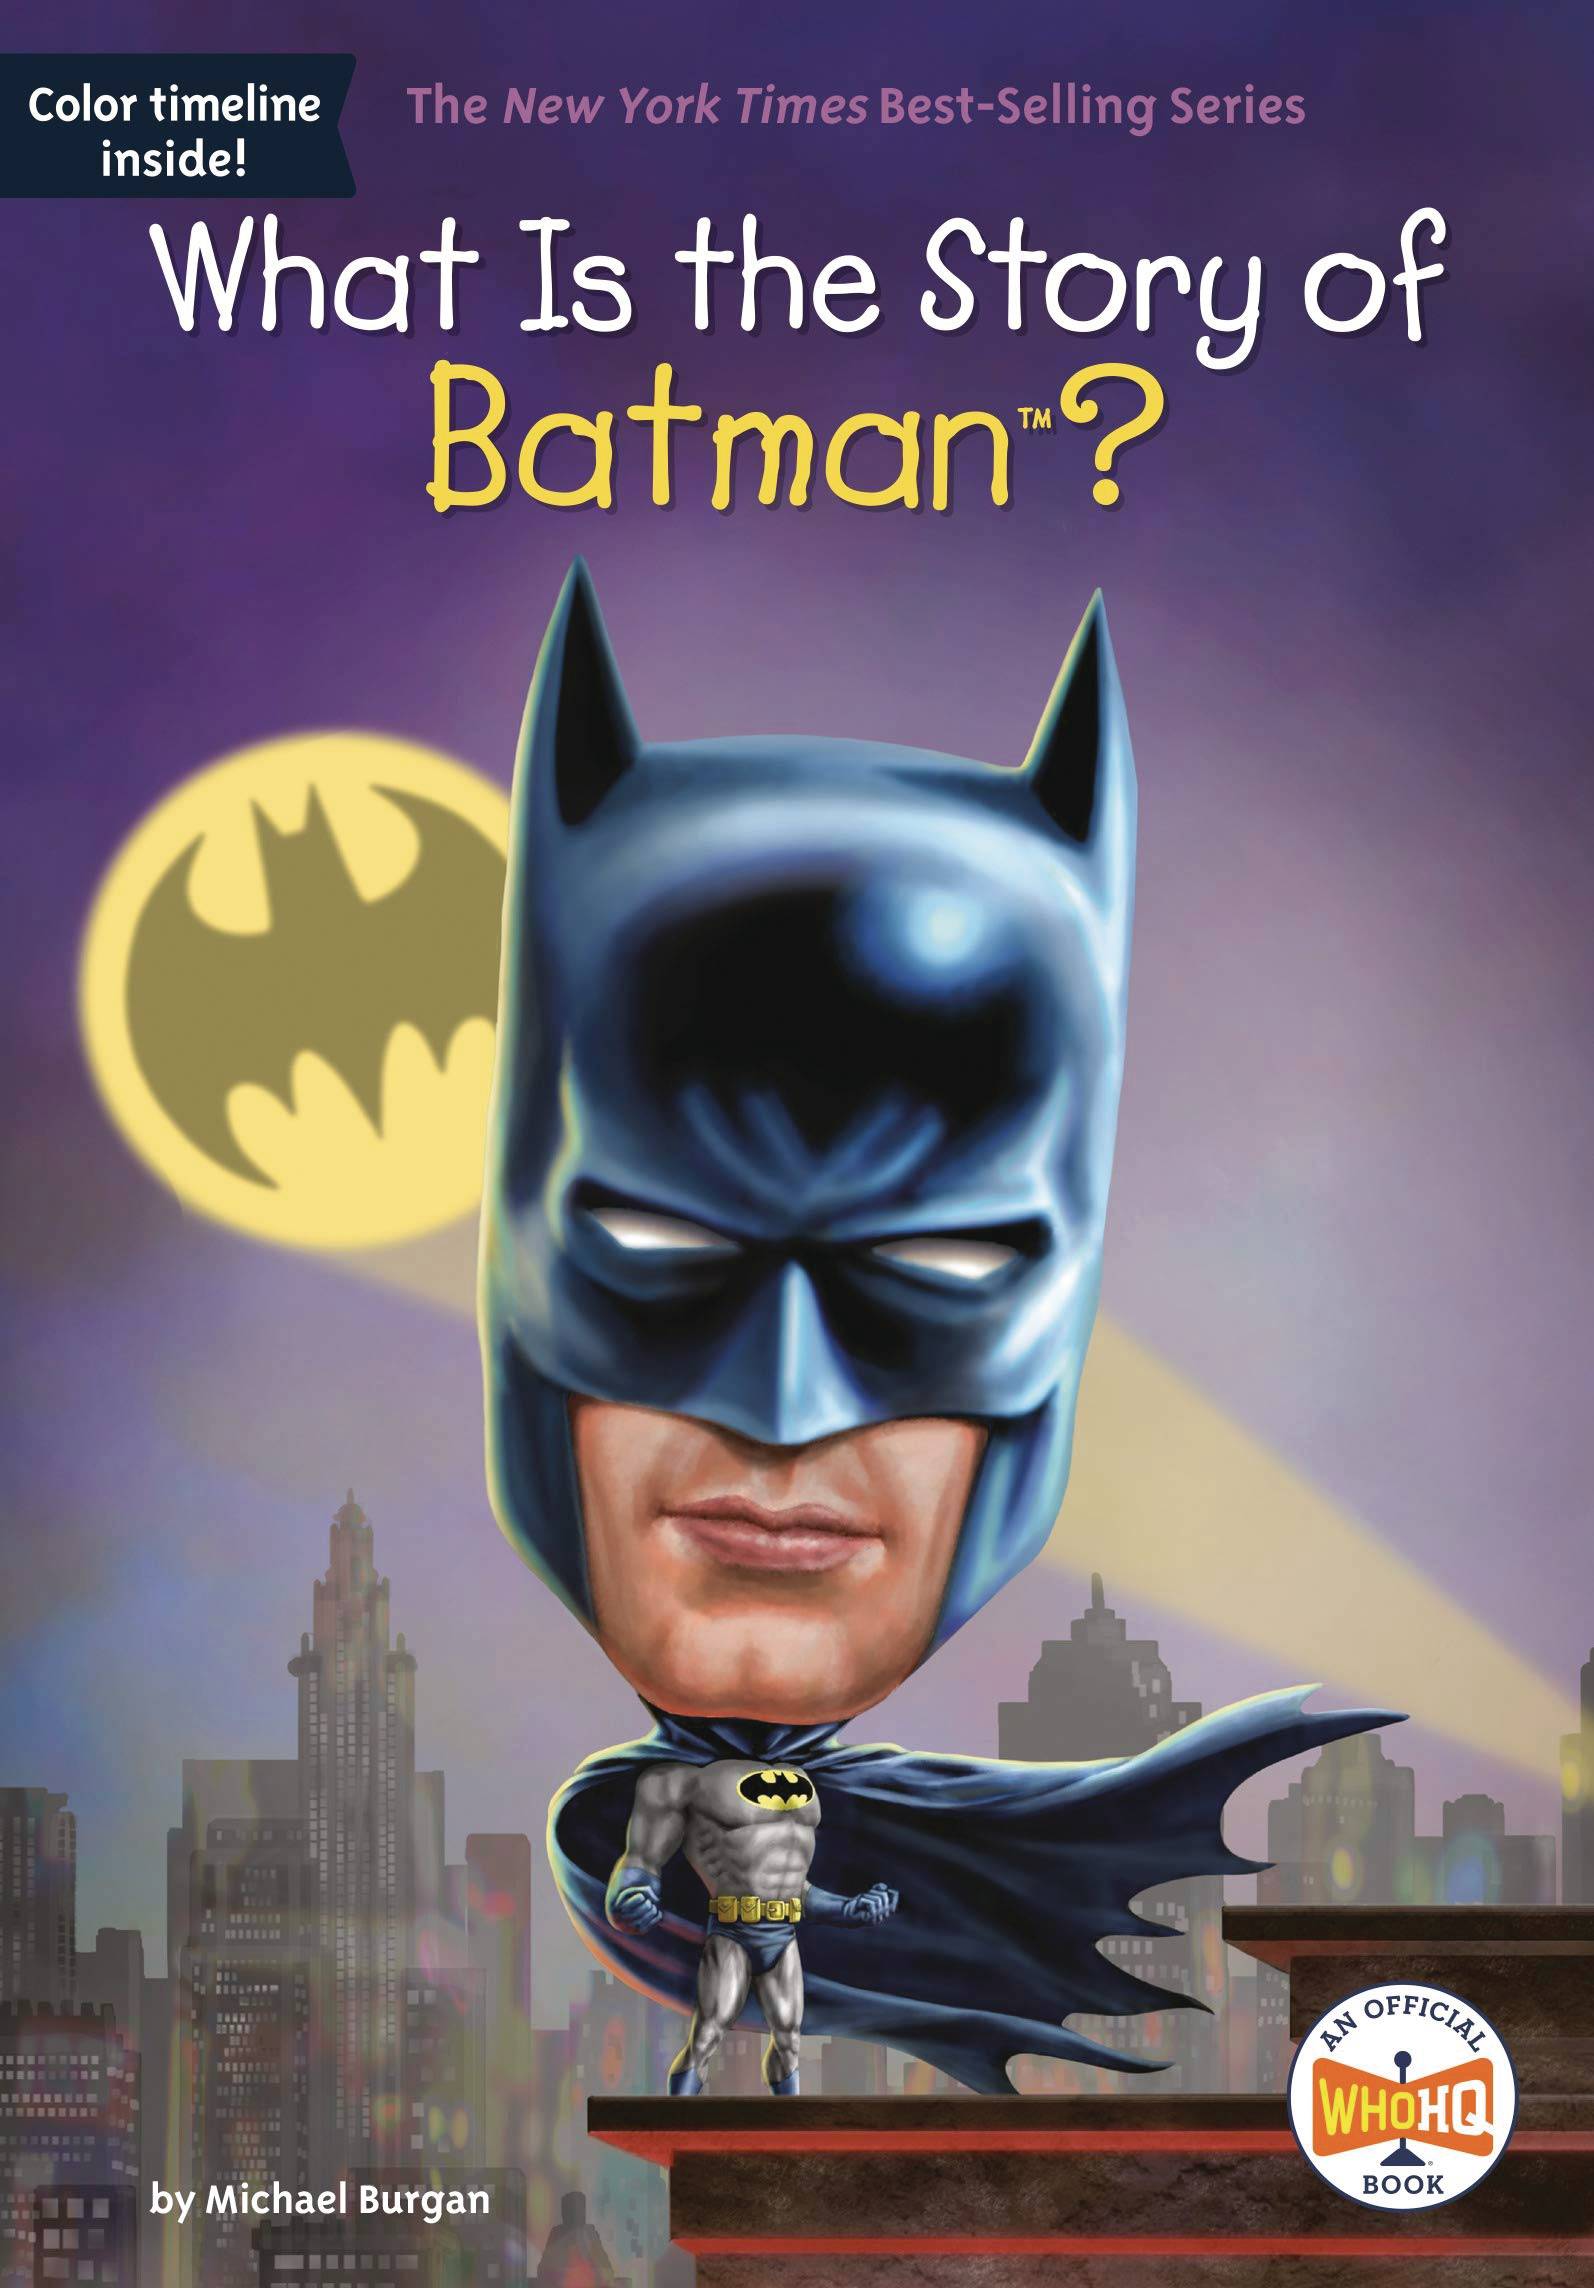 What Is The Story of Soft Cover Volume 4 Batman